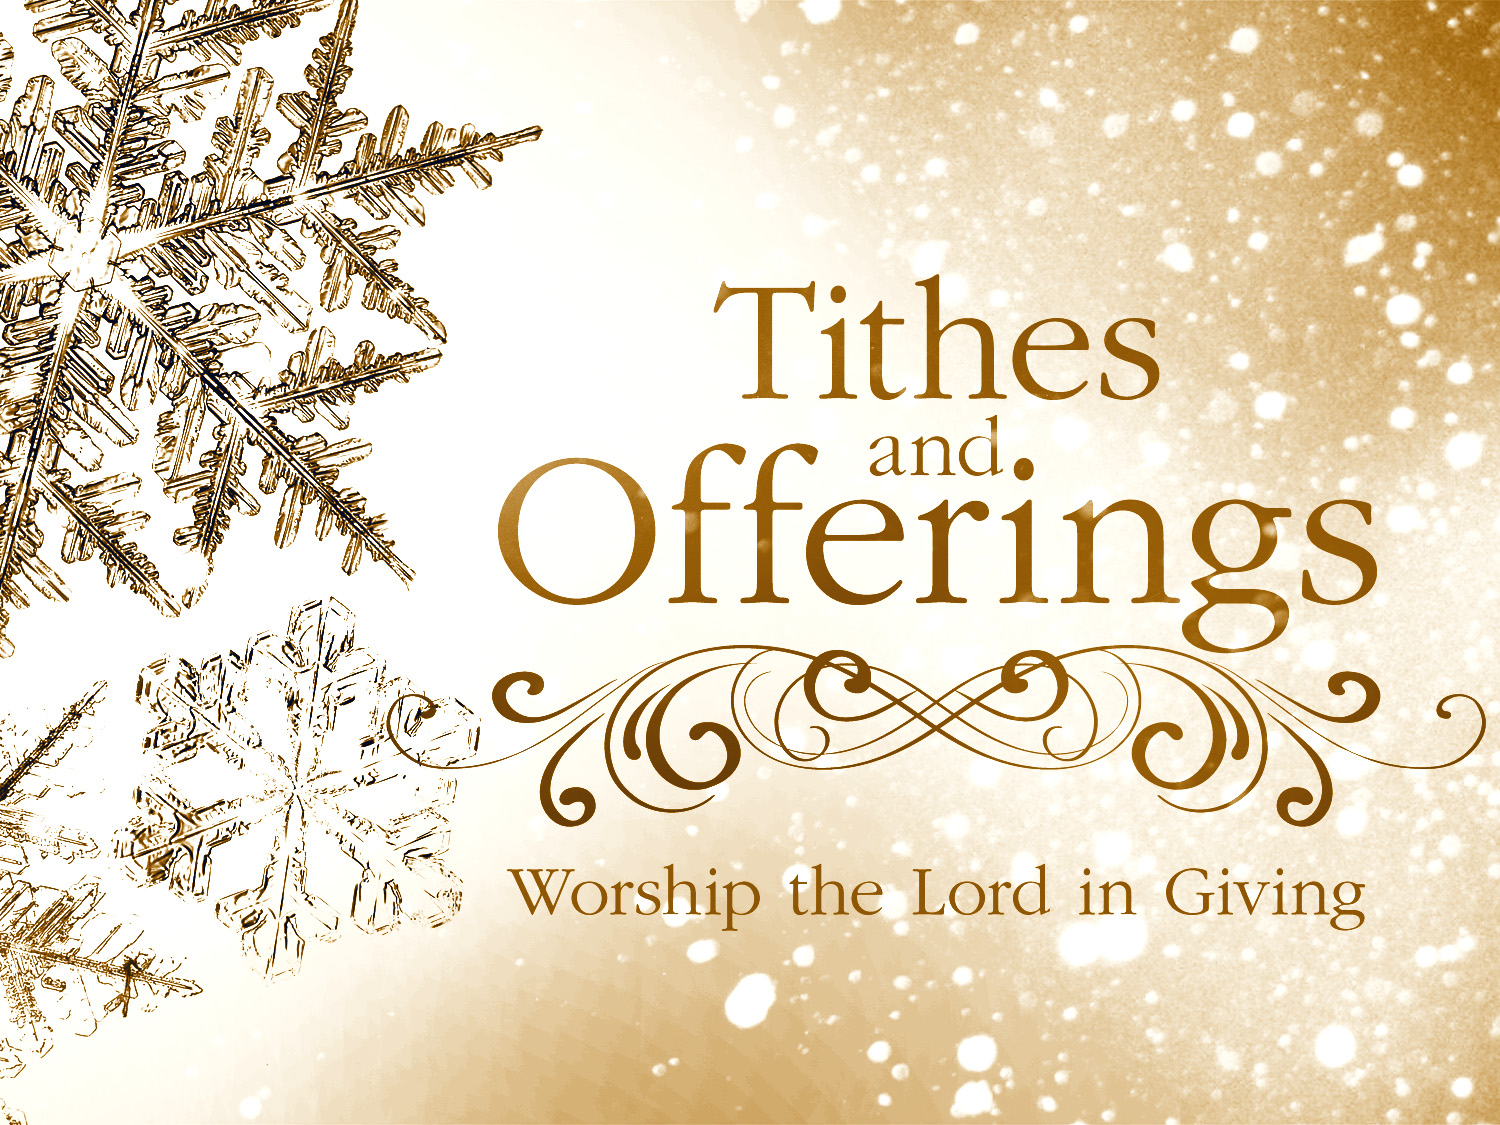 WHAT IS TITHING? HOPE INTERNATIONAL CHURCH AND MINISTRIES